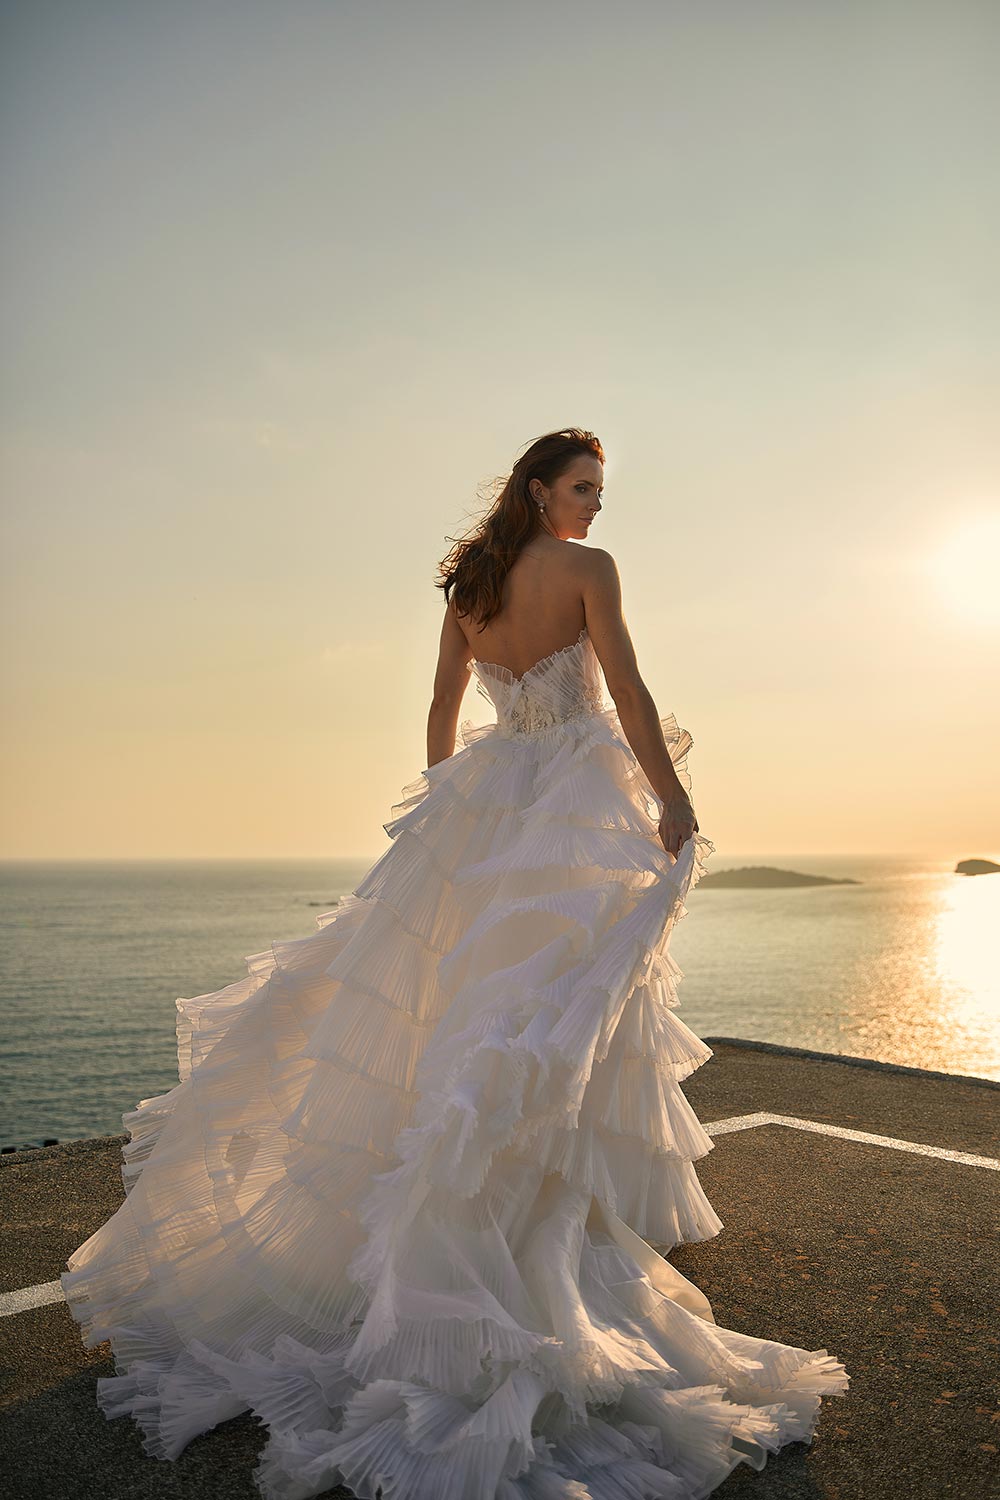 Experience Antonia, a bridal gown with drama & detail. Features 3D lace, a semi-sheer bodice, and layers of pleated silk draping on a ball gown silhouette. By Vinka Design